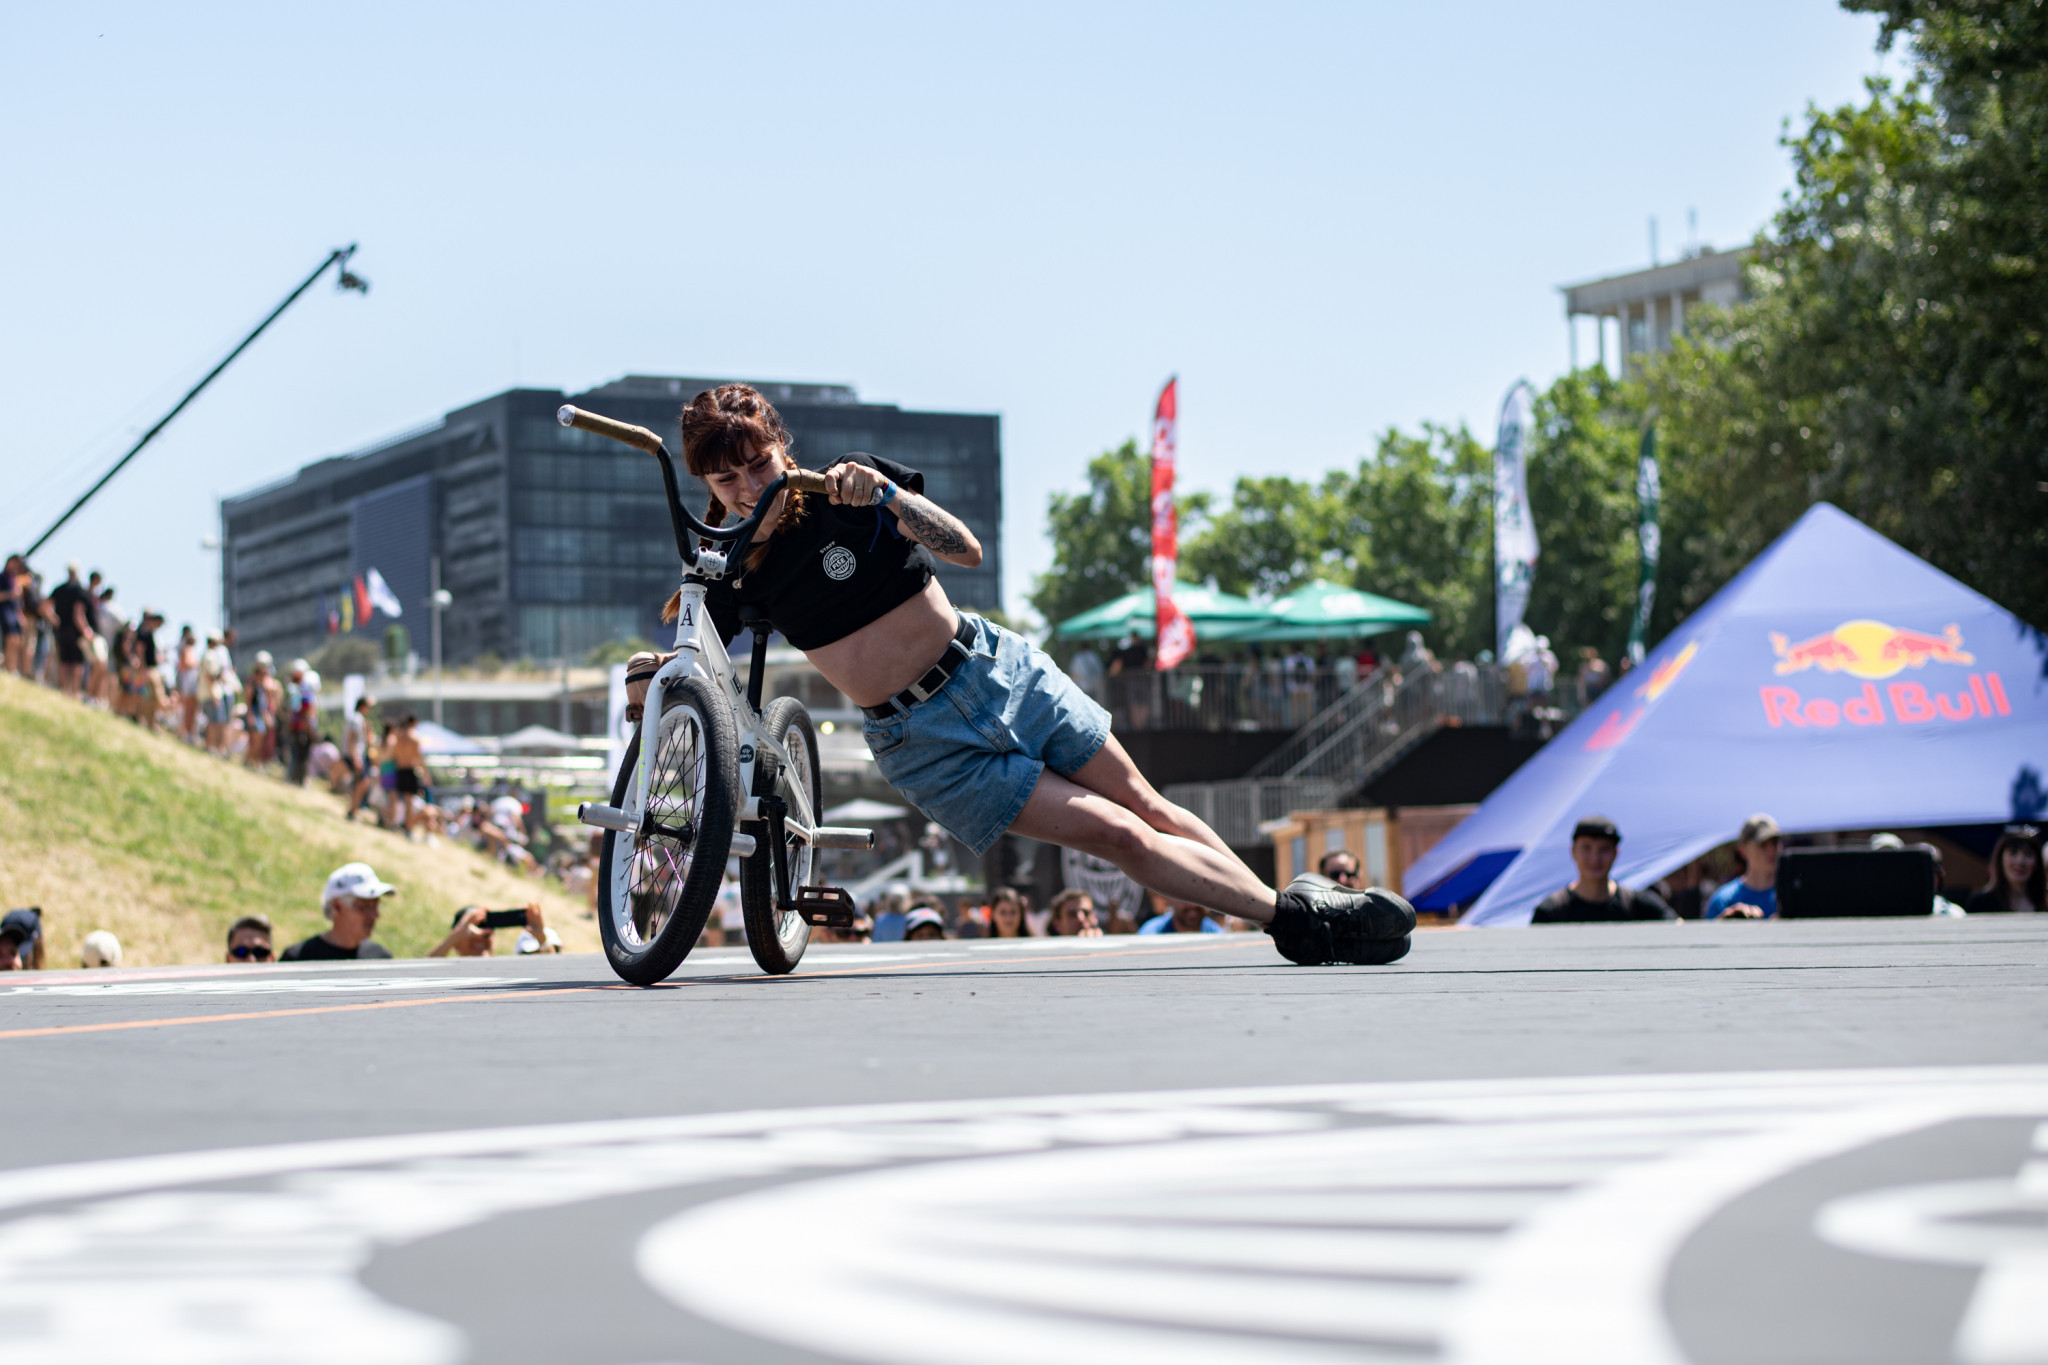 The sport has been described as a form of artistic cycling with a blend of breakdancing ©Hurricane - FISE